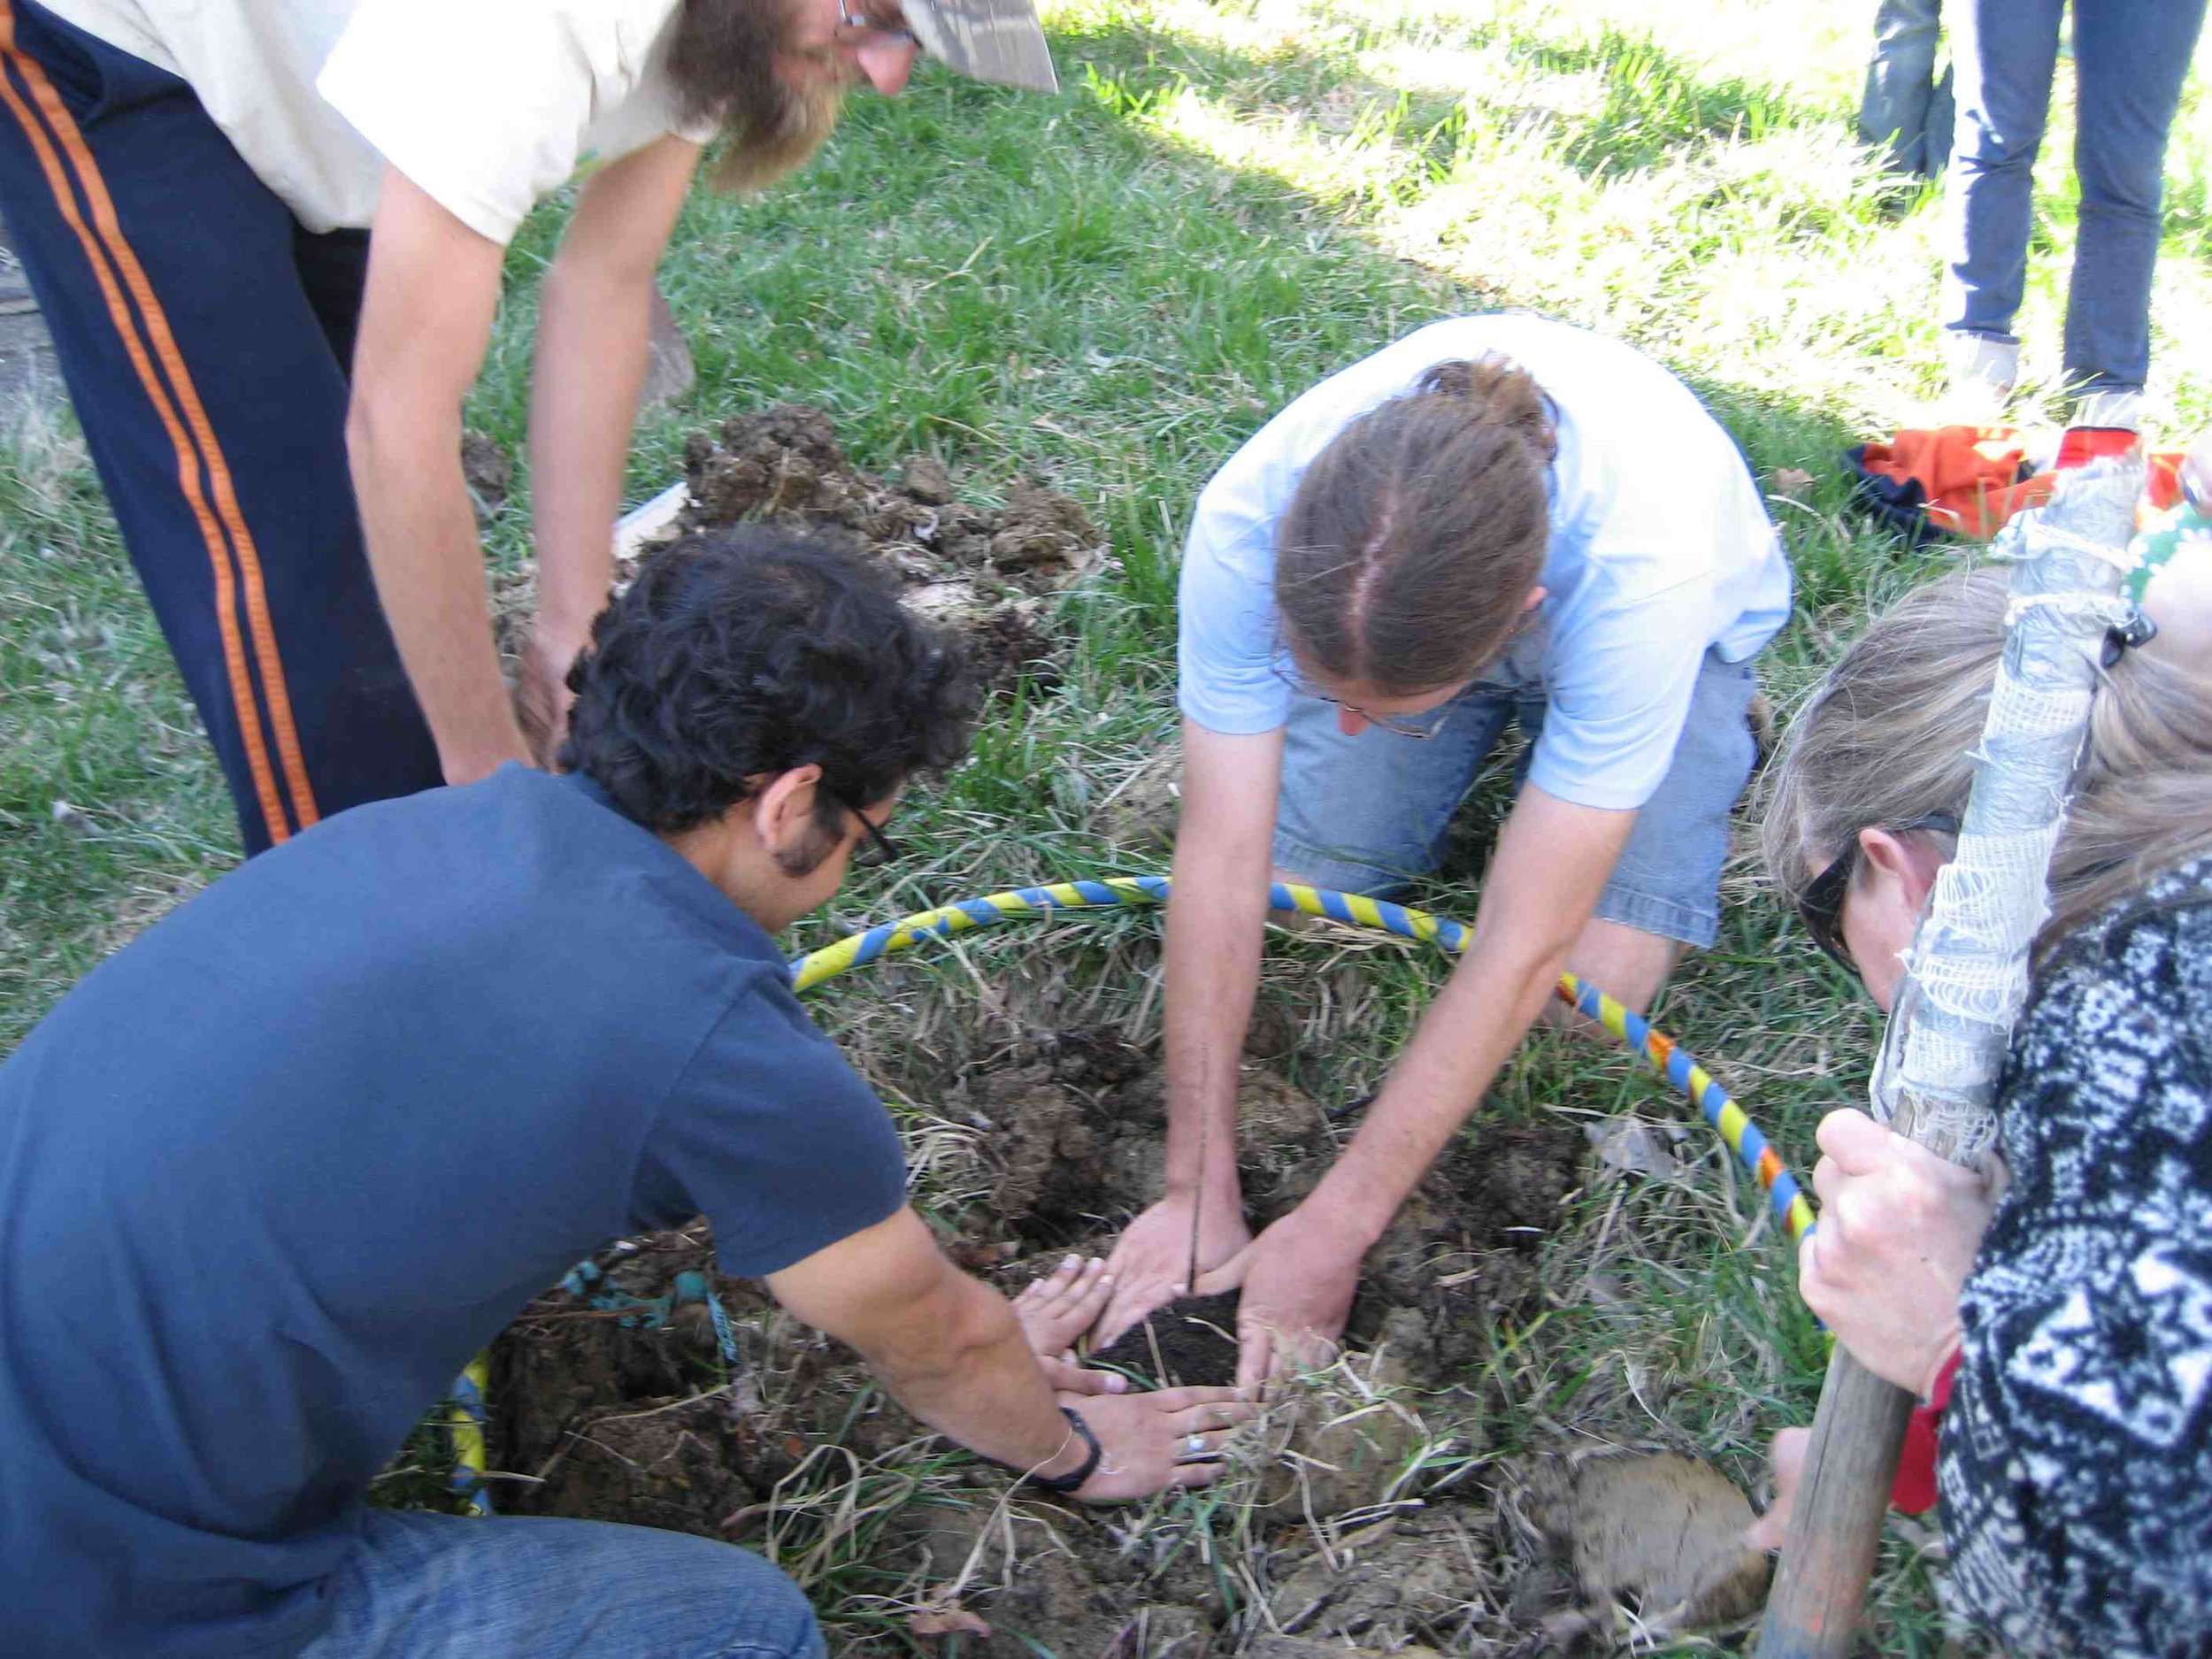 Planting a Northern Pecan for the class tree